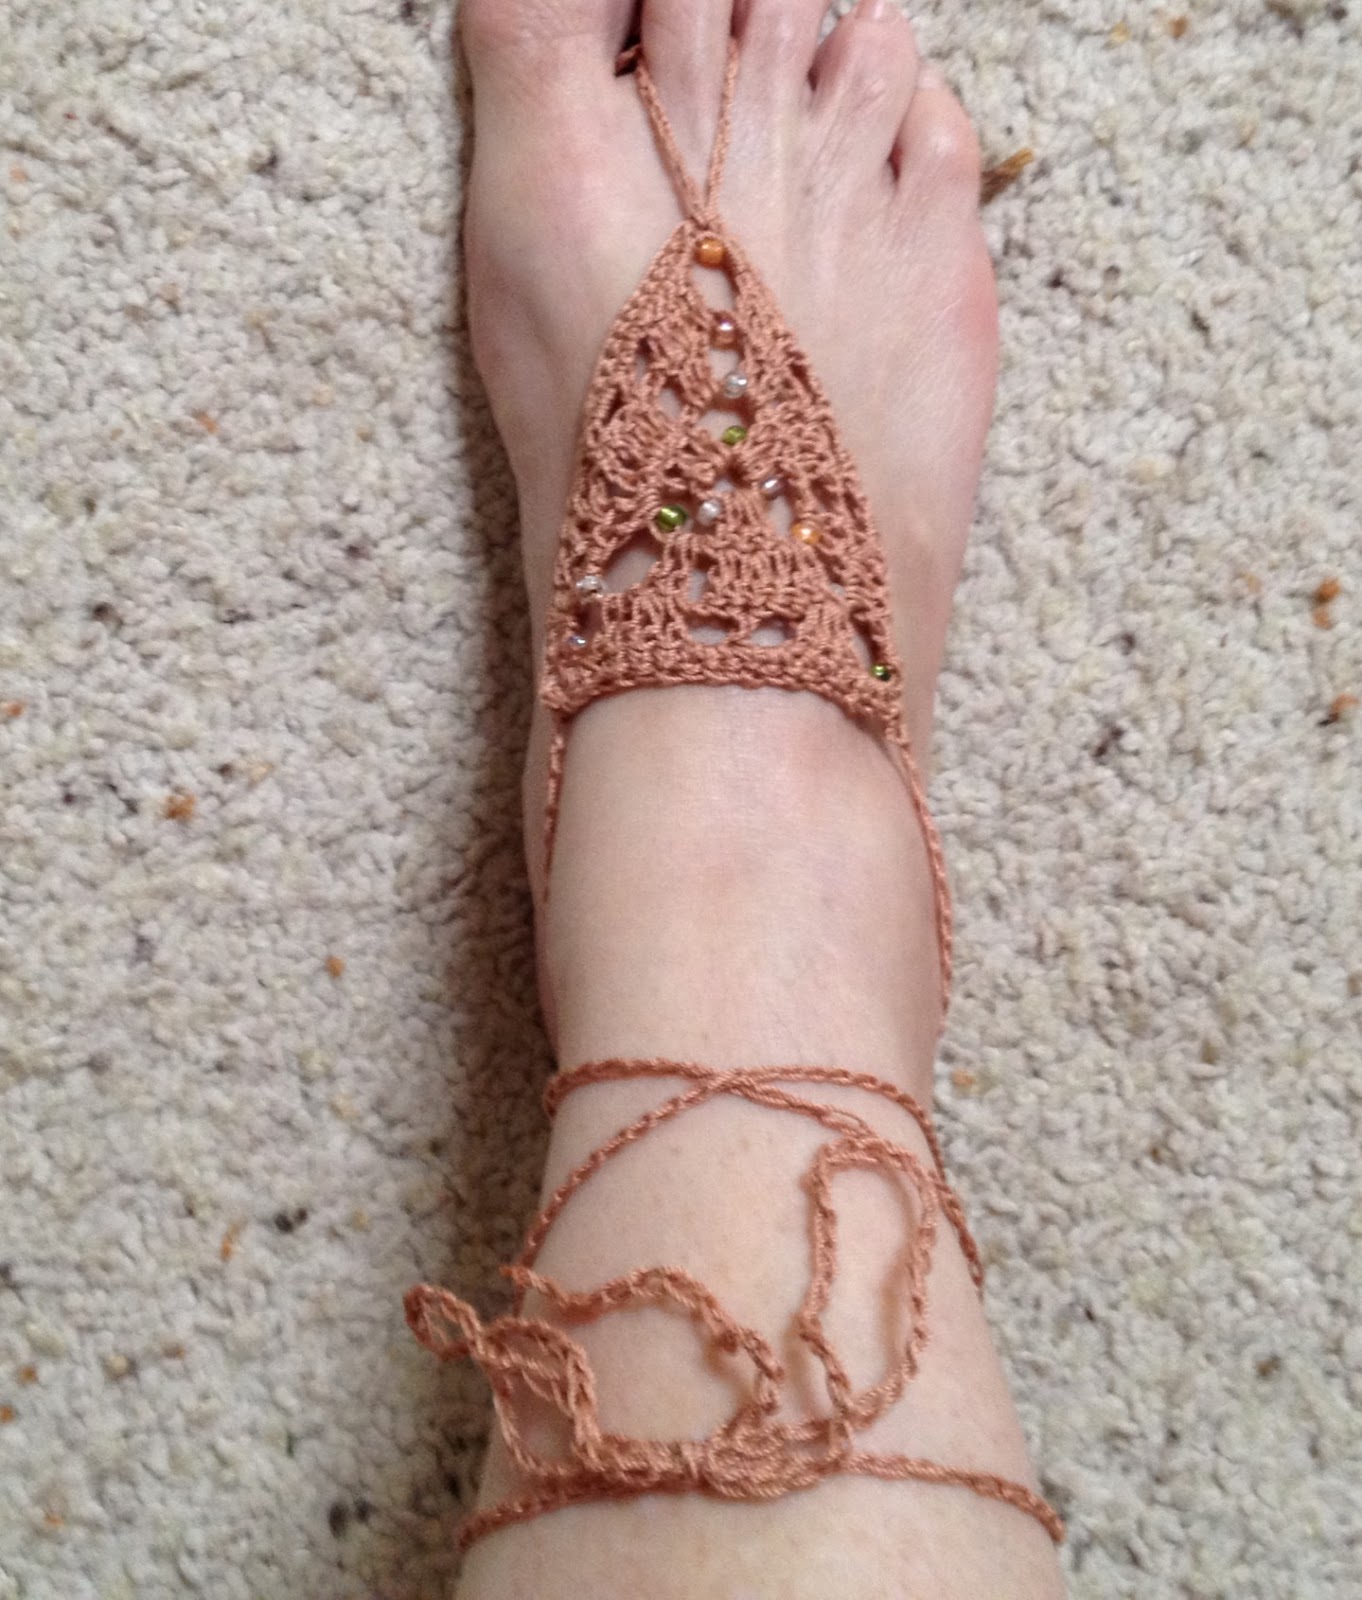 New to Me': Crochet Barefoot Sandals